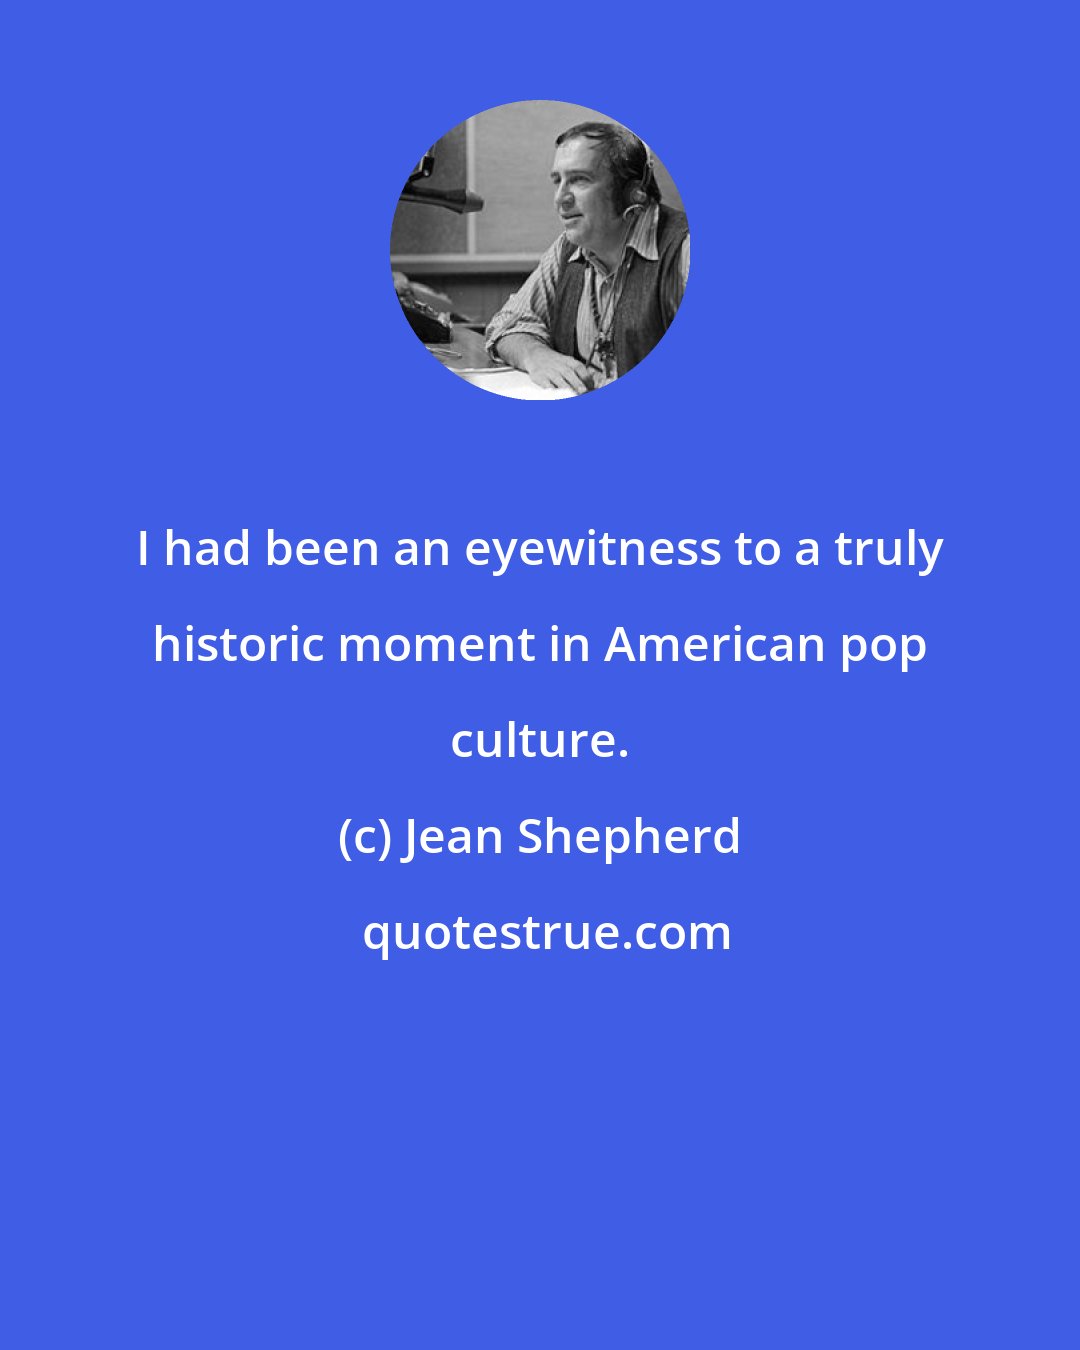 Jean Shepherd: I had been an eyewitness to a truly historic moment in American pop culture.